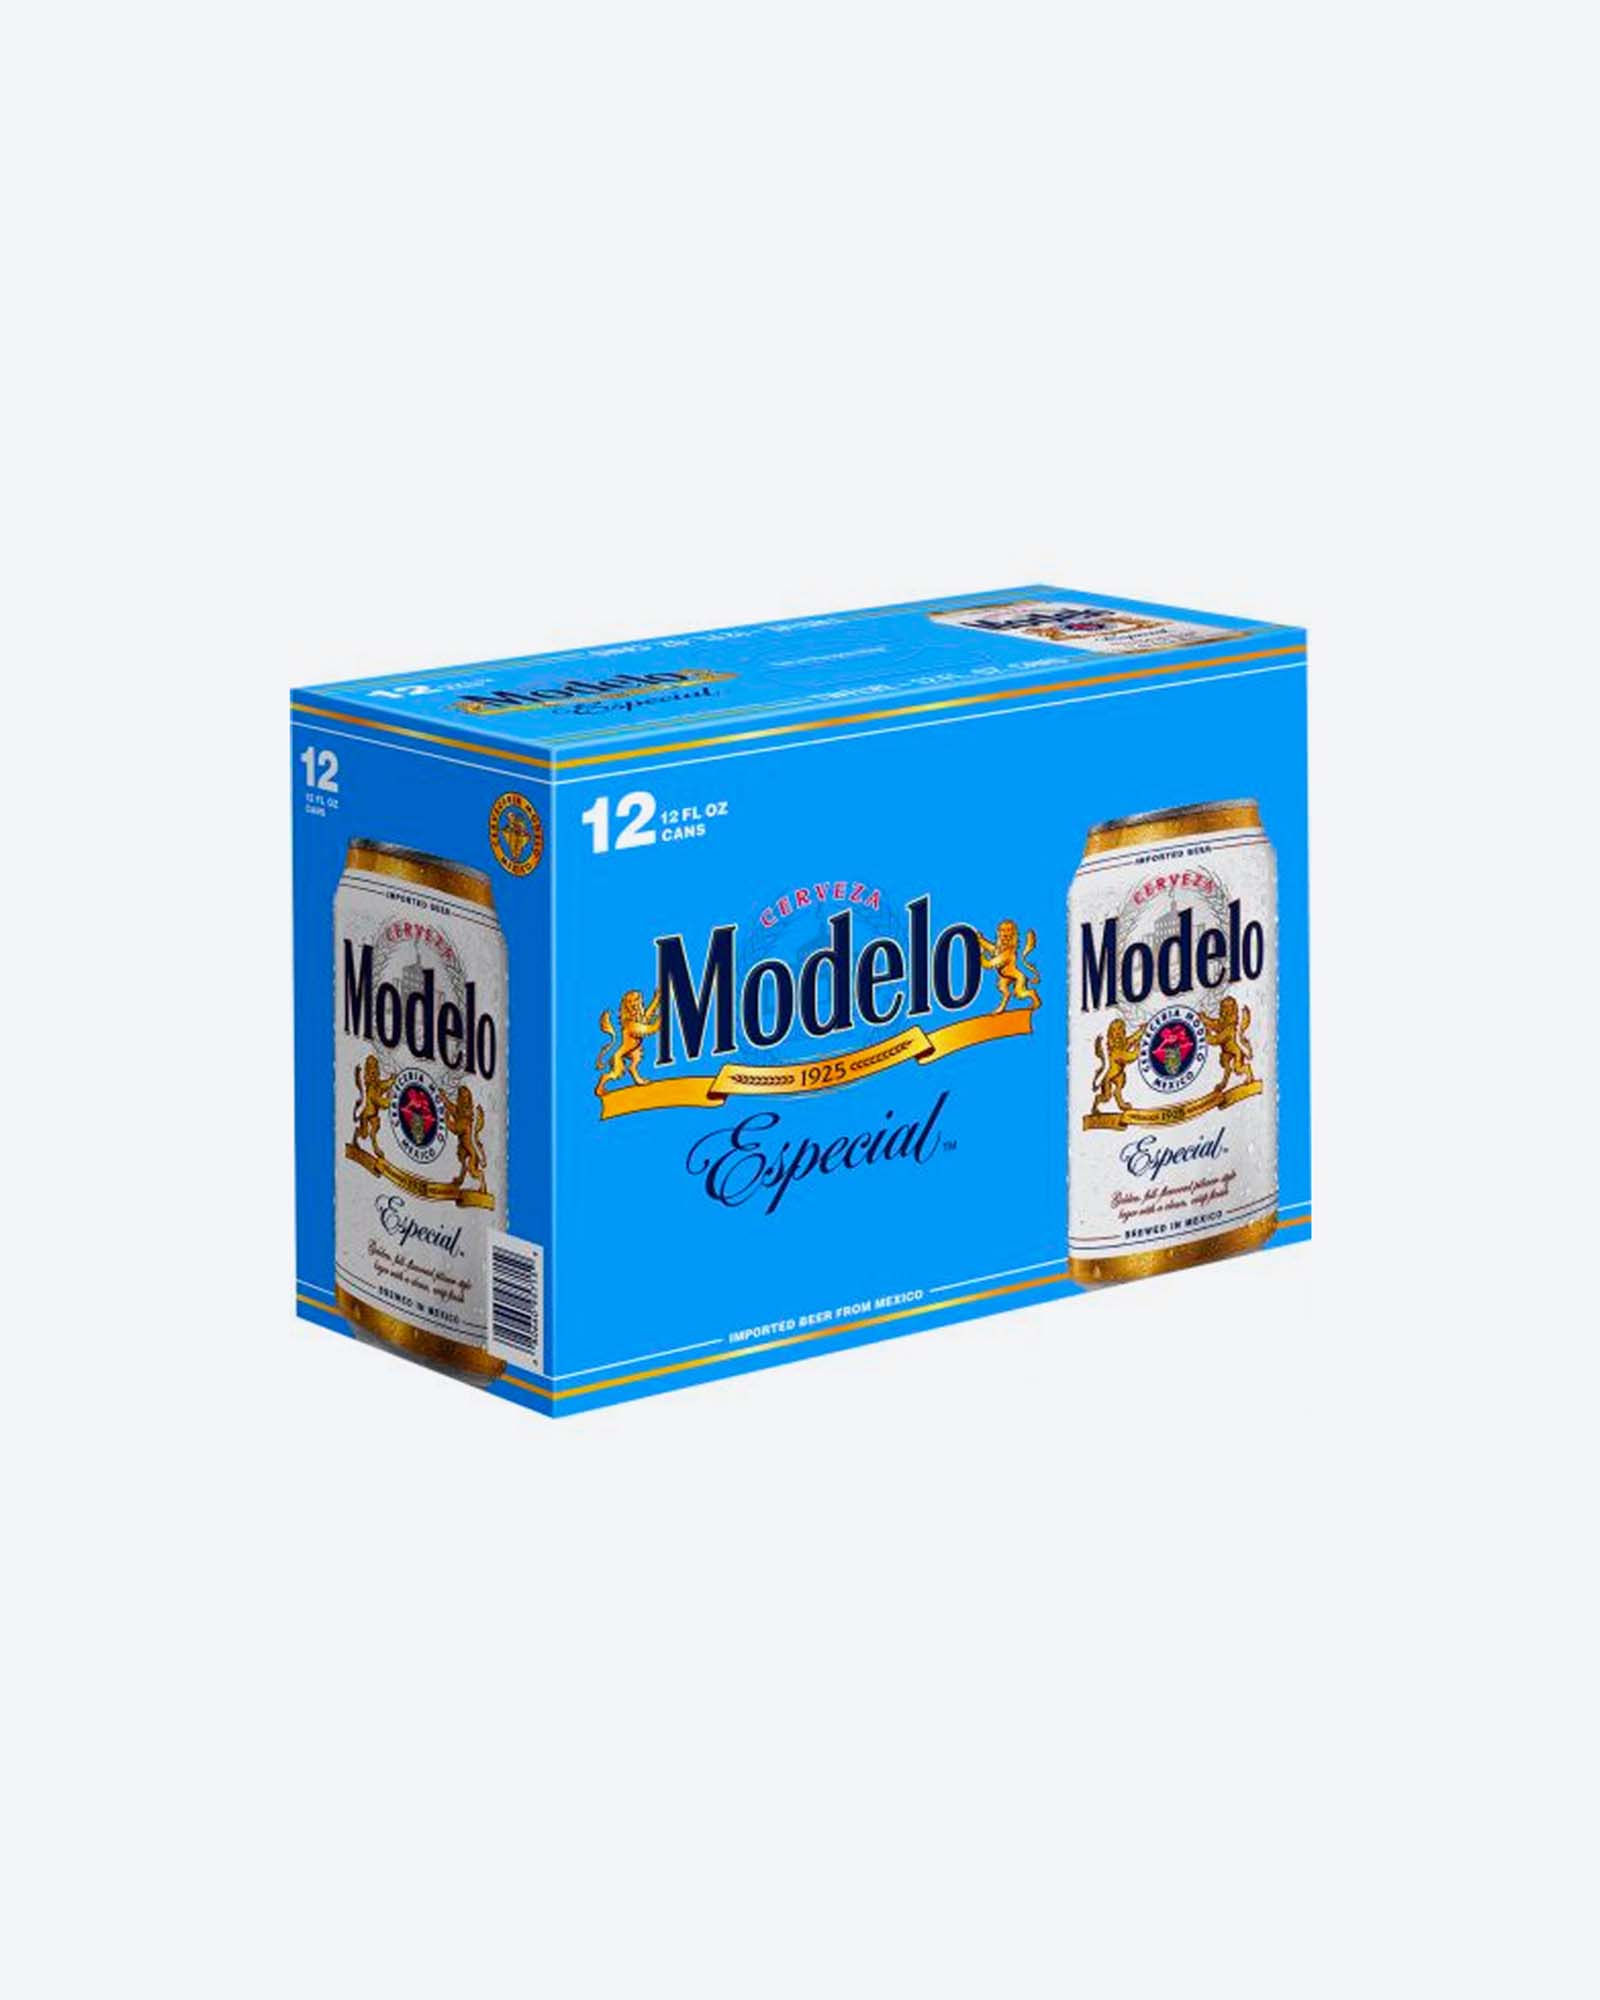 Modelo Especial 12-pack Delivery & Pickup | Foxtrot